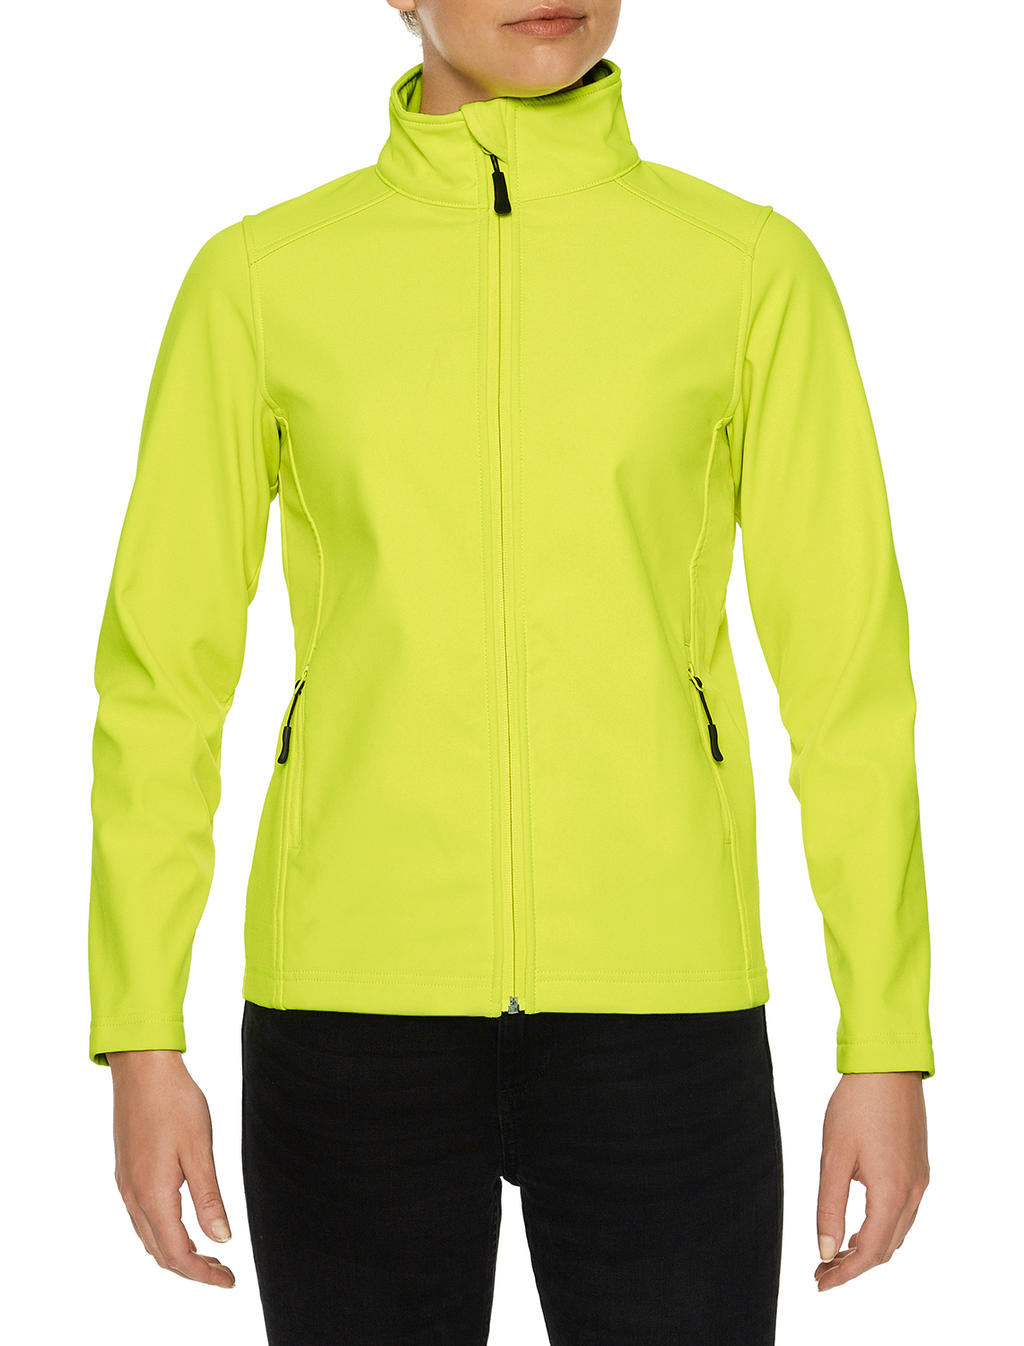  Hammer? Ladies Softshell Jacket in Farbe Safety Green